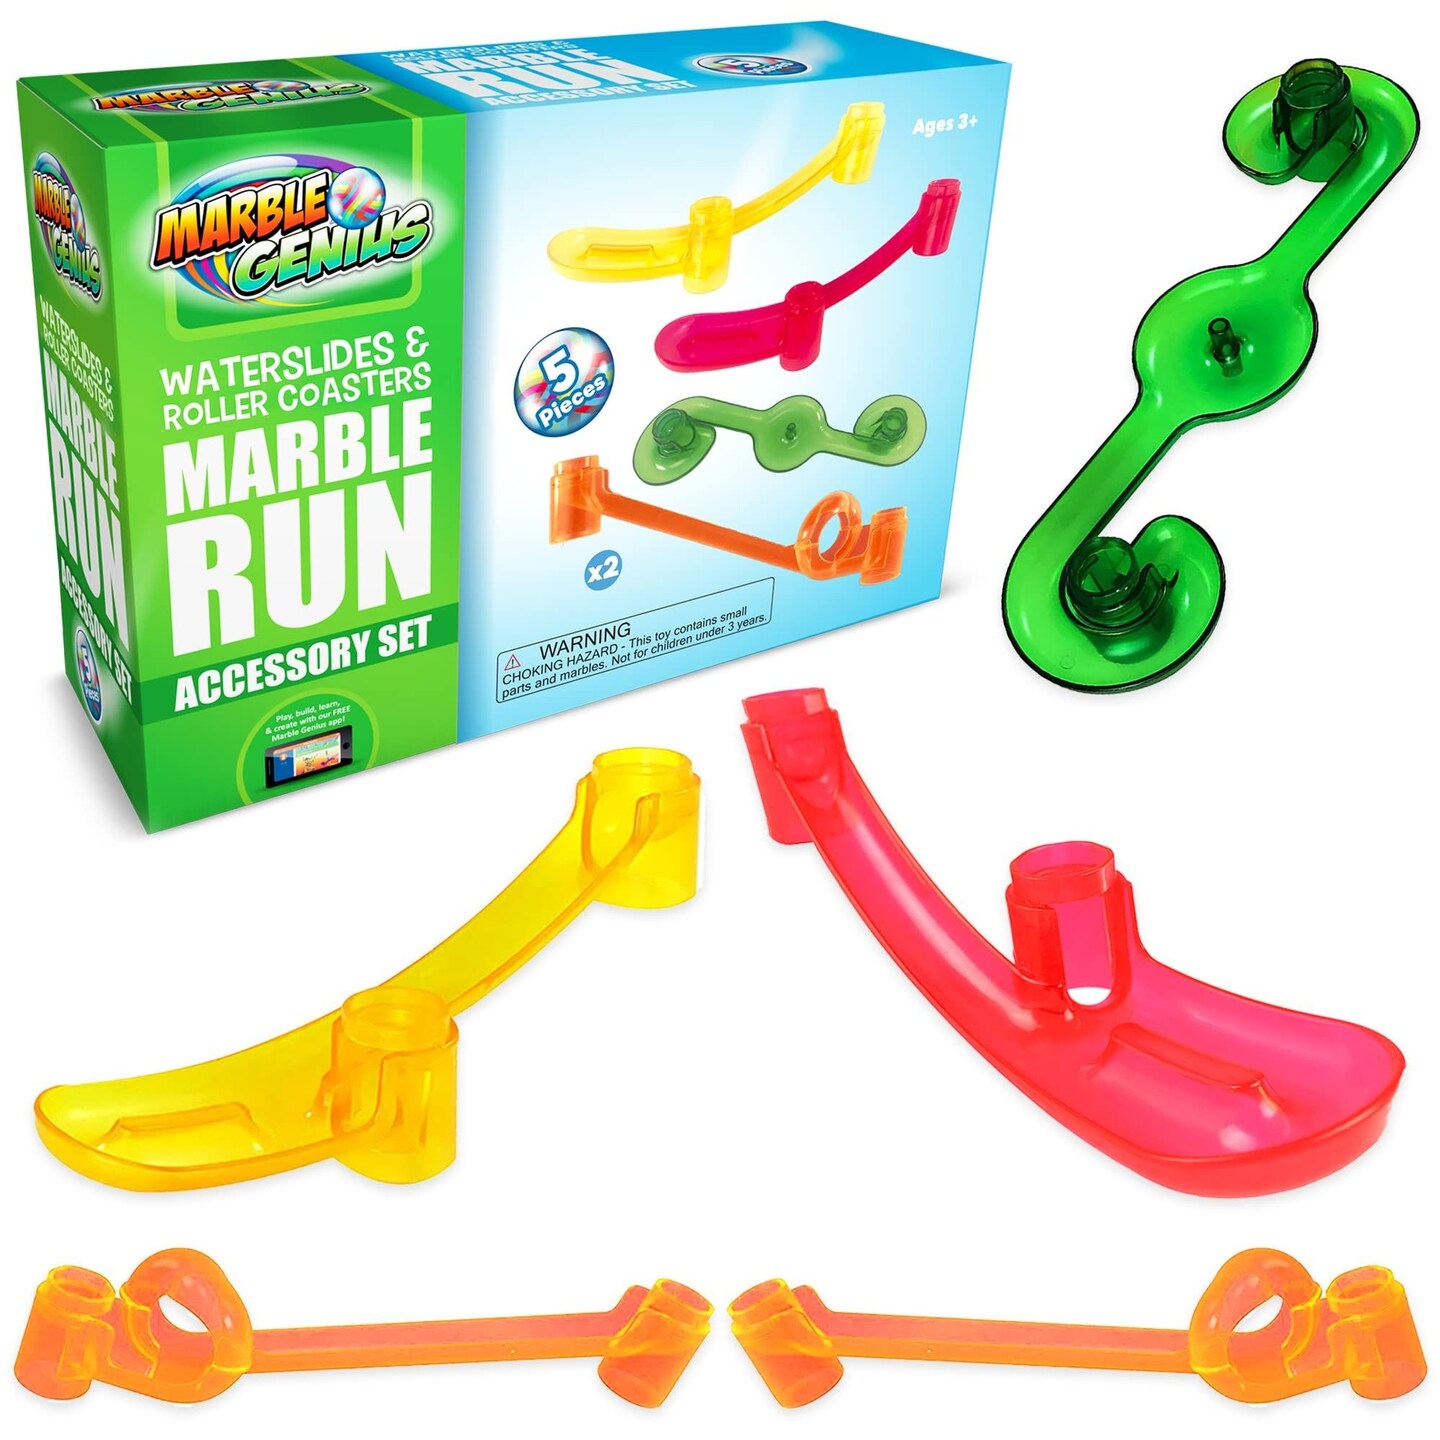 Marble Genius Waterslides &#x26; Roller Coasters Marble Run Accessory Set (5 pcs.): Your Ultimate Marble Track Race Set and Maze, Experience Thrilling Adventures &#x26; Heart-Pumping Marble Roller Coaster Rides